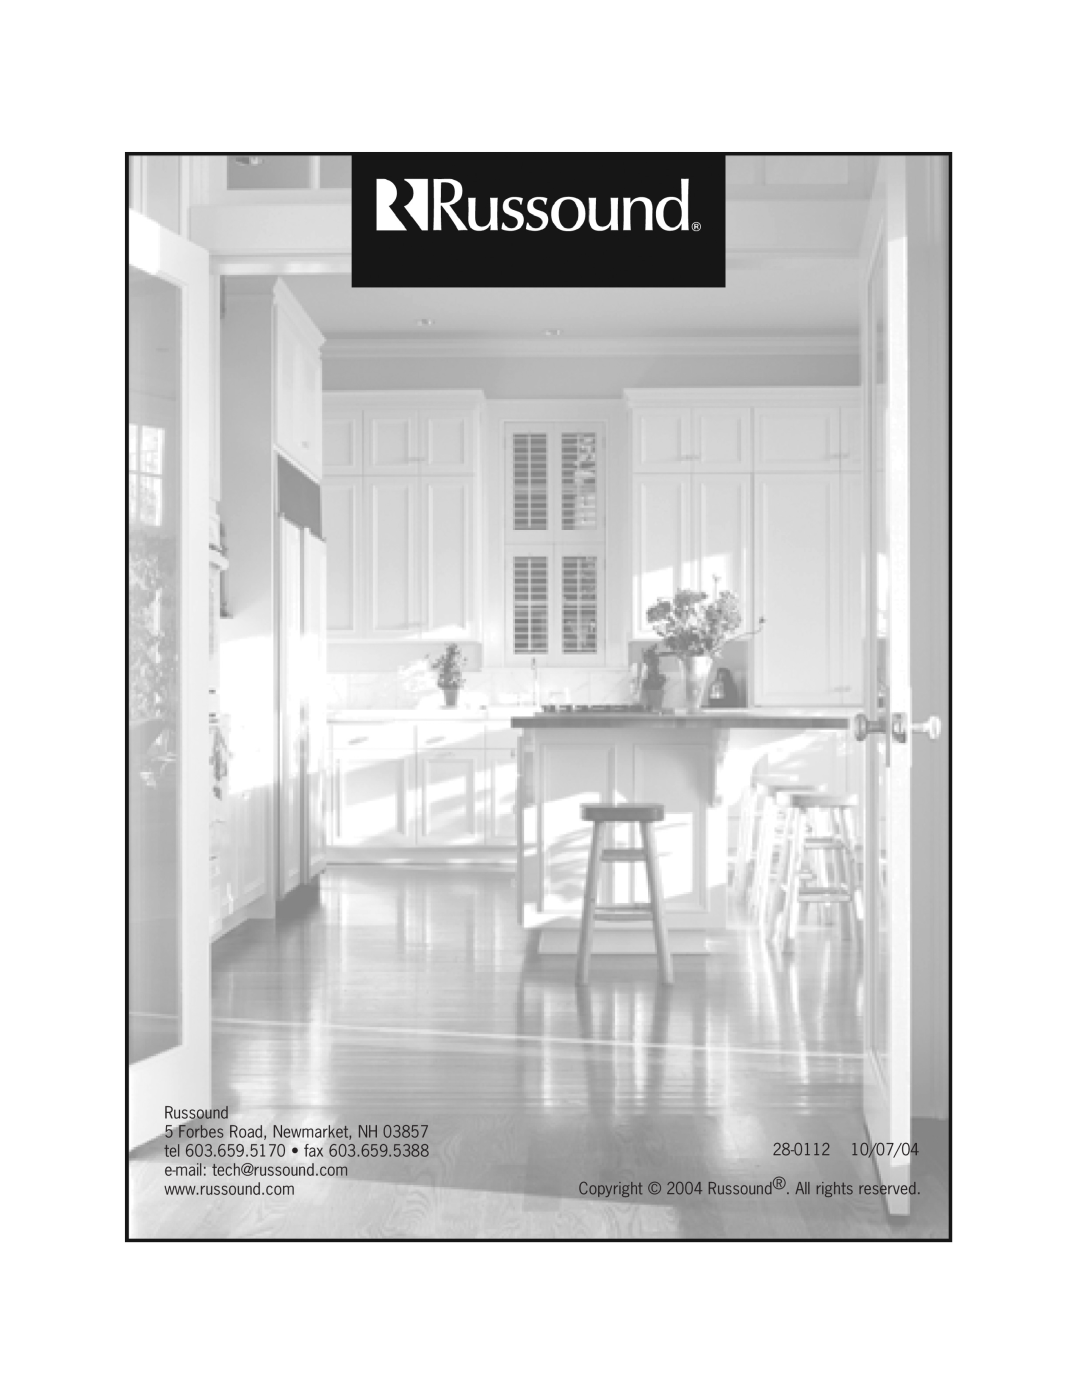 Russound CAM6.6X-S1/S2 instruction manual 28-011210/07/04, Copyright 2004 Russound. All rights reserved 